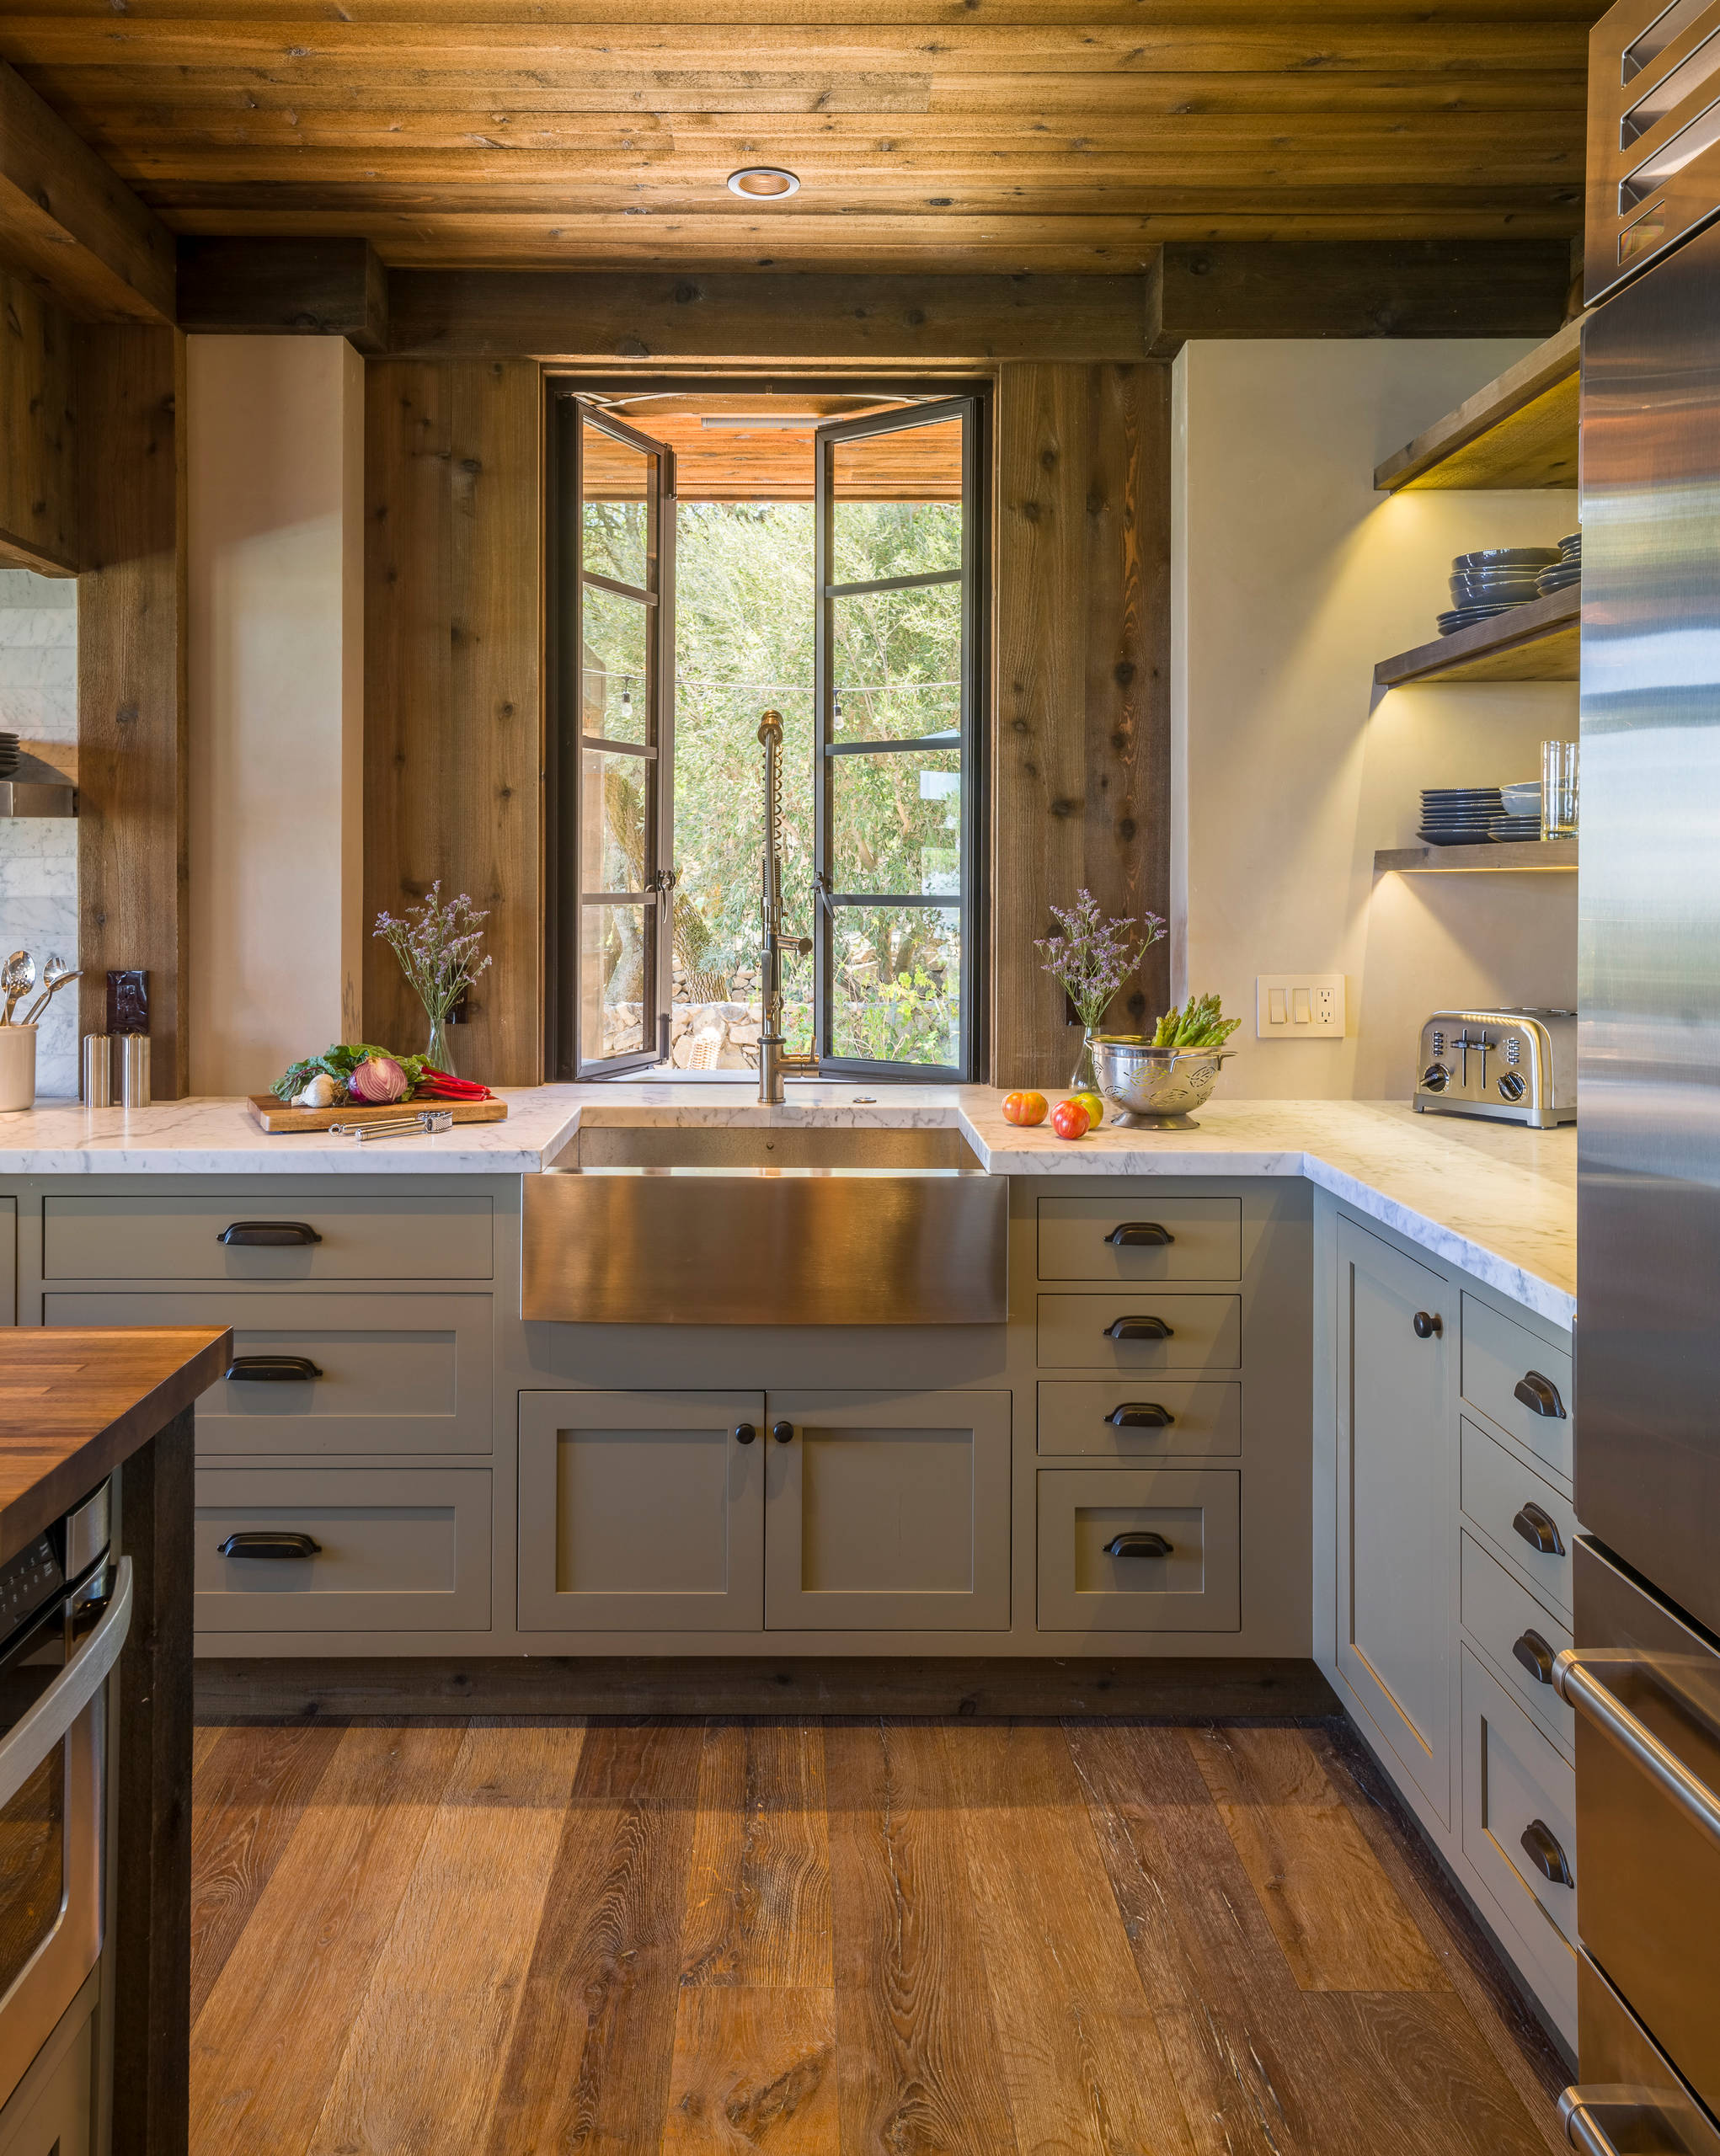 75 beautiful rustic kitchen pictures & ideas | houzz